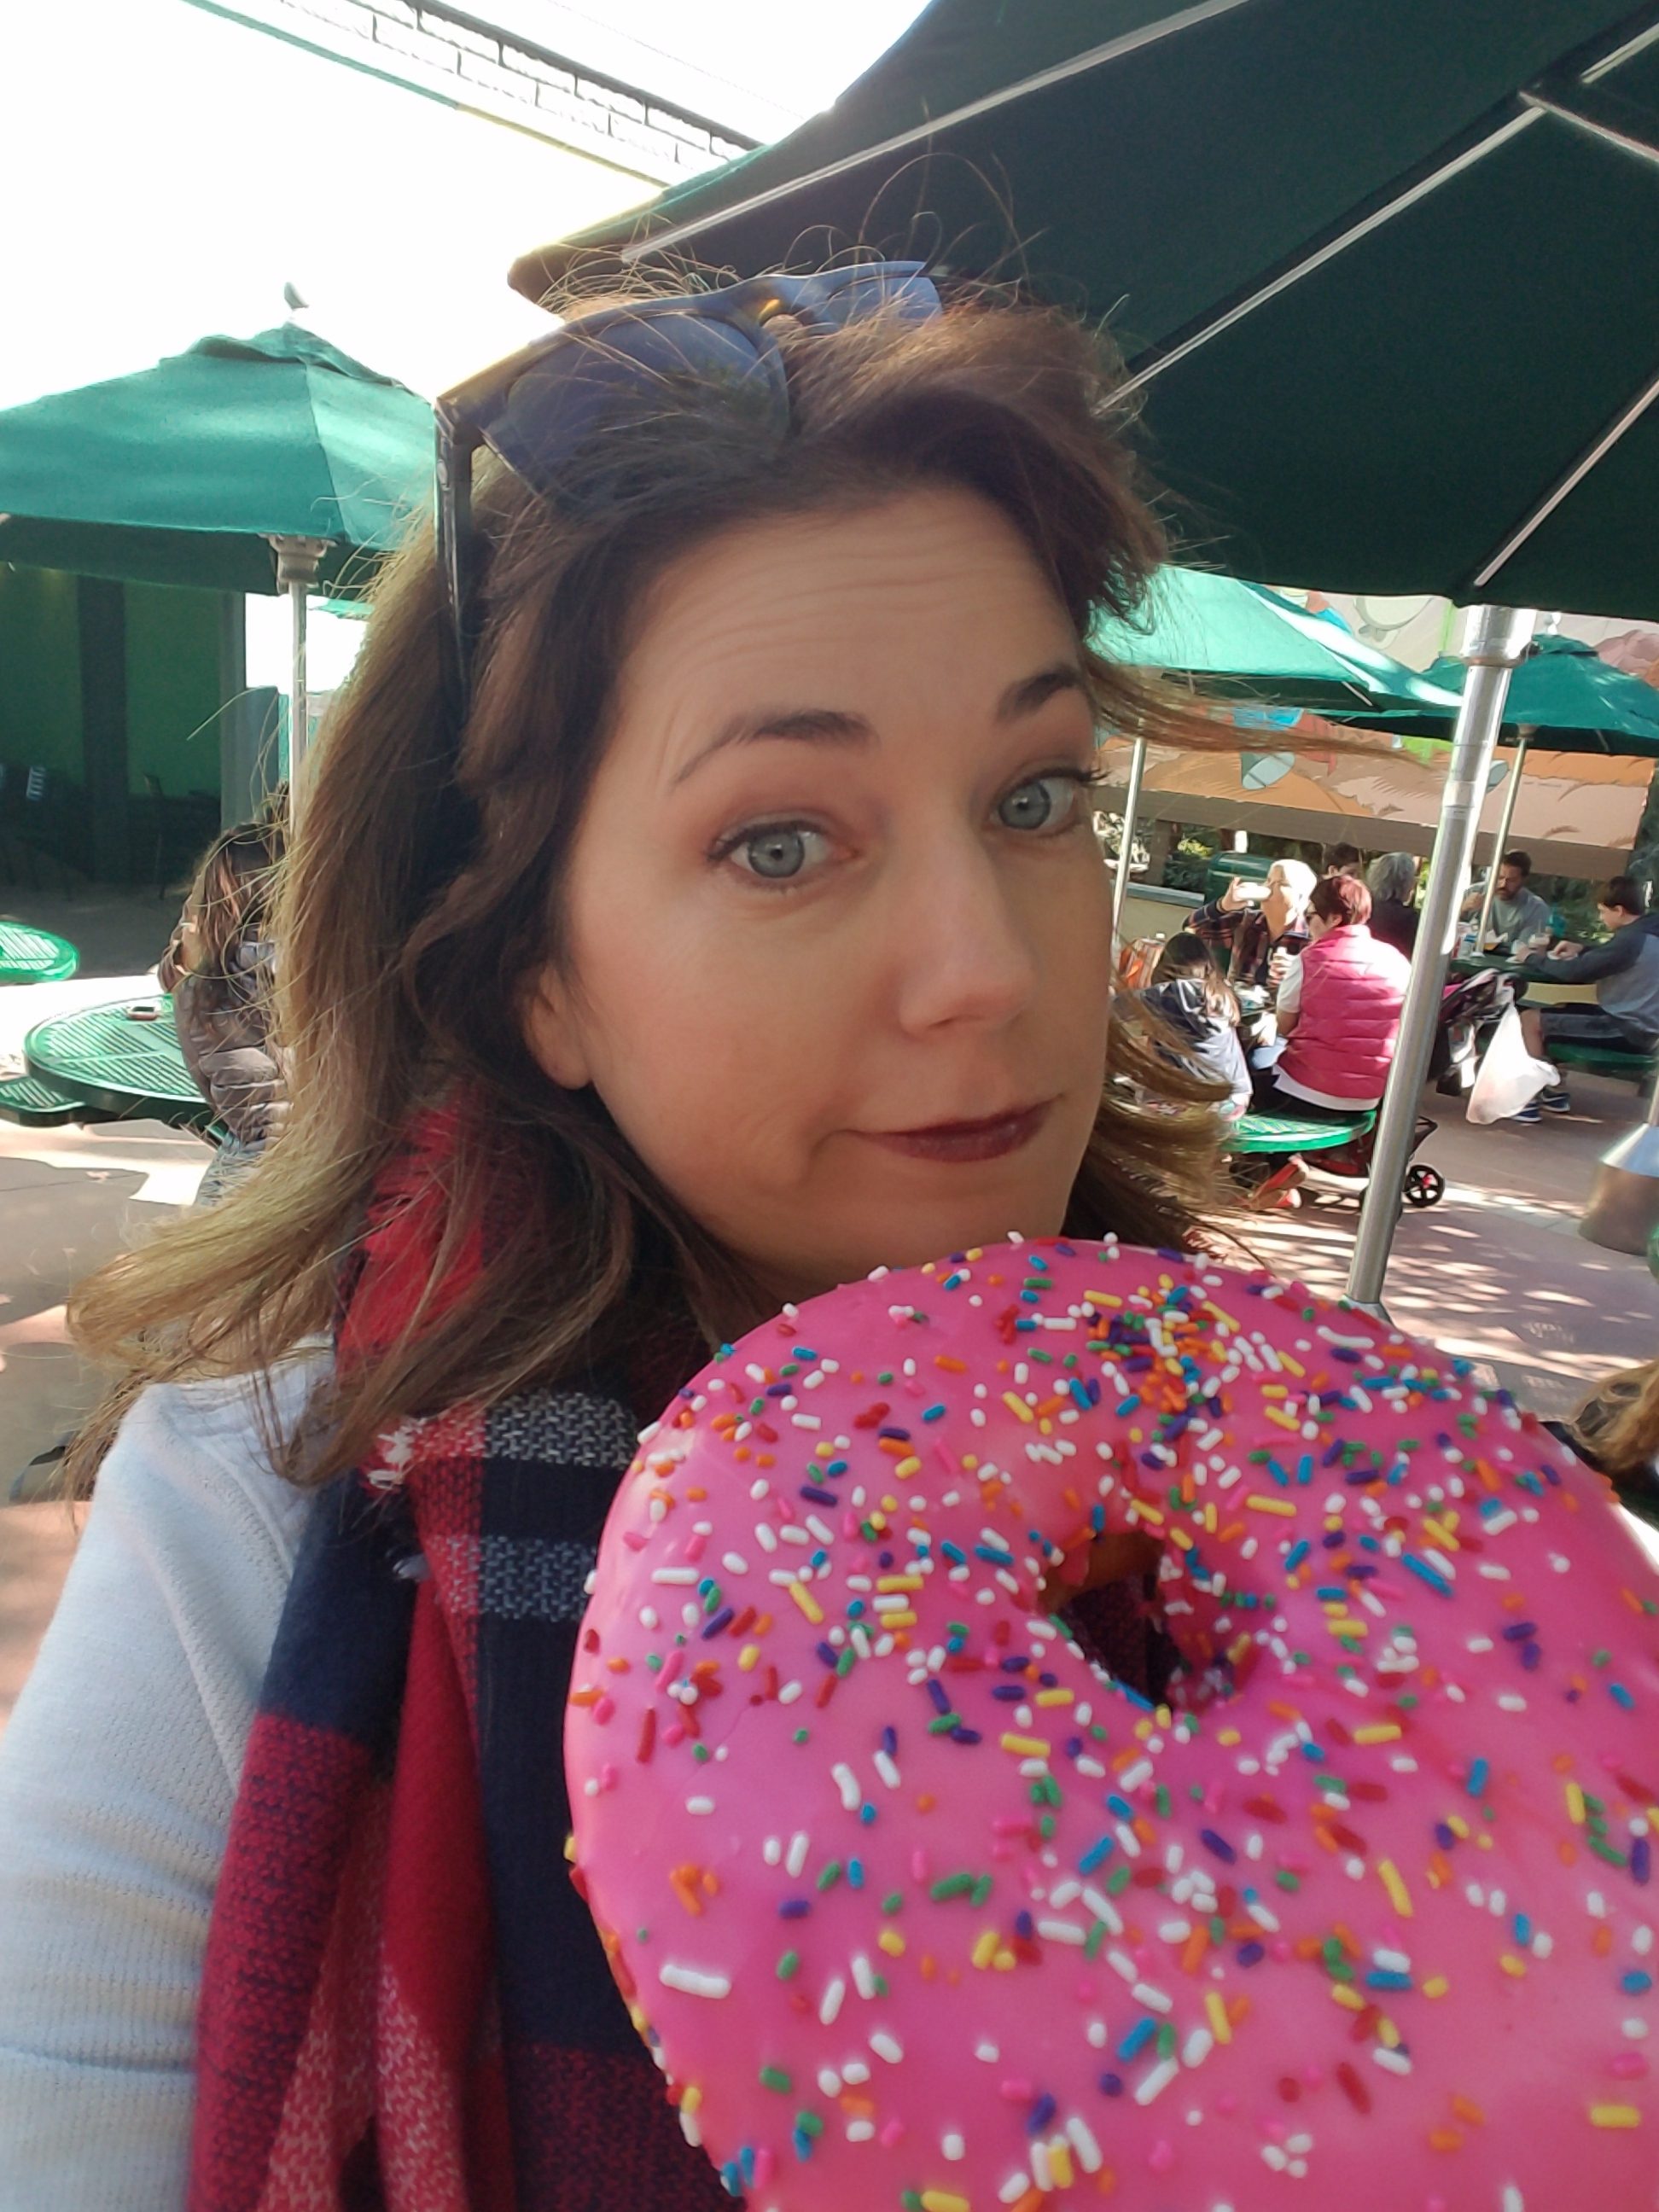 giant sharable donut at universal studios